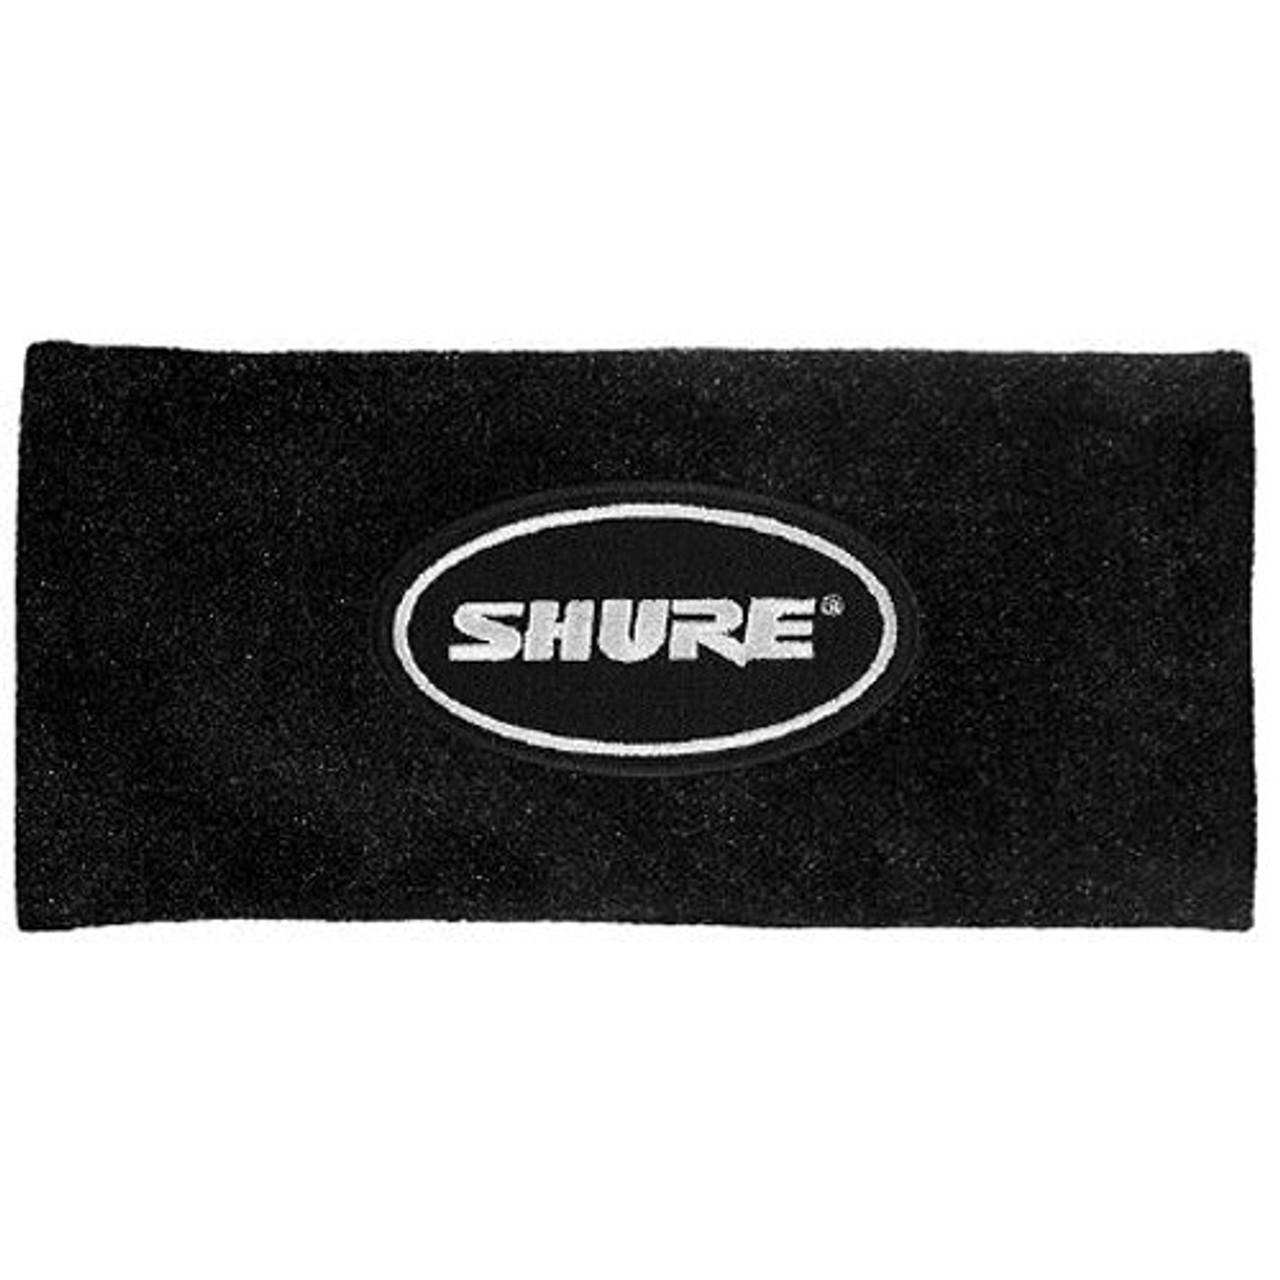 Shure A313VB Velveteen Pouch for KSM313 and KSM313/NE Dual-Voice Ribbon Microphones (A313VB)